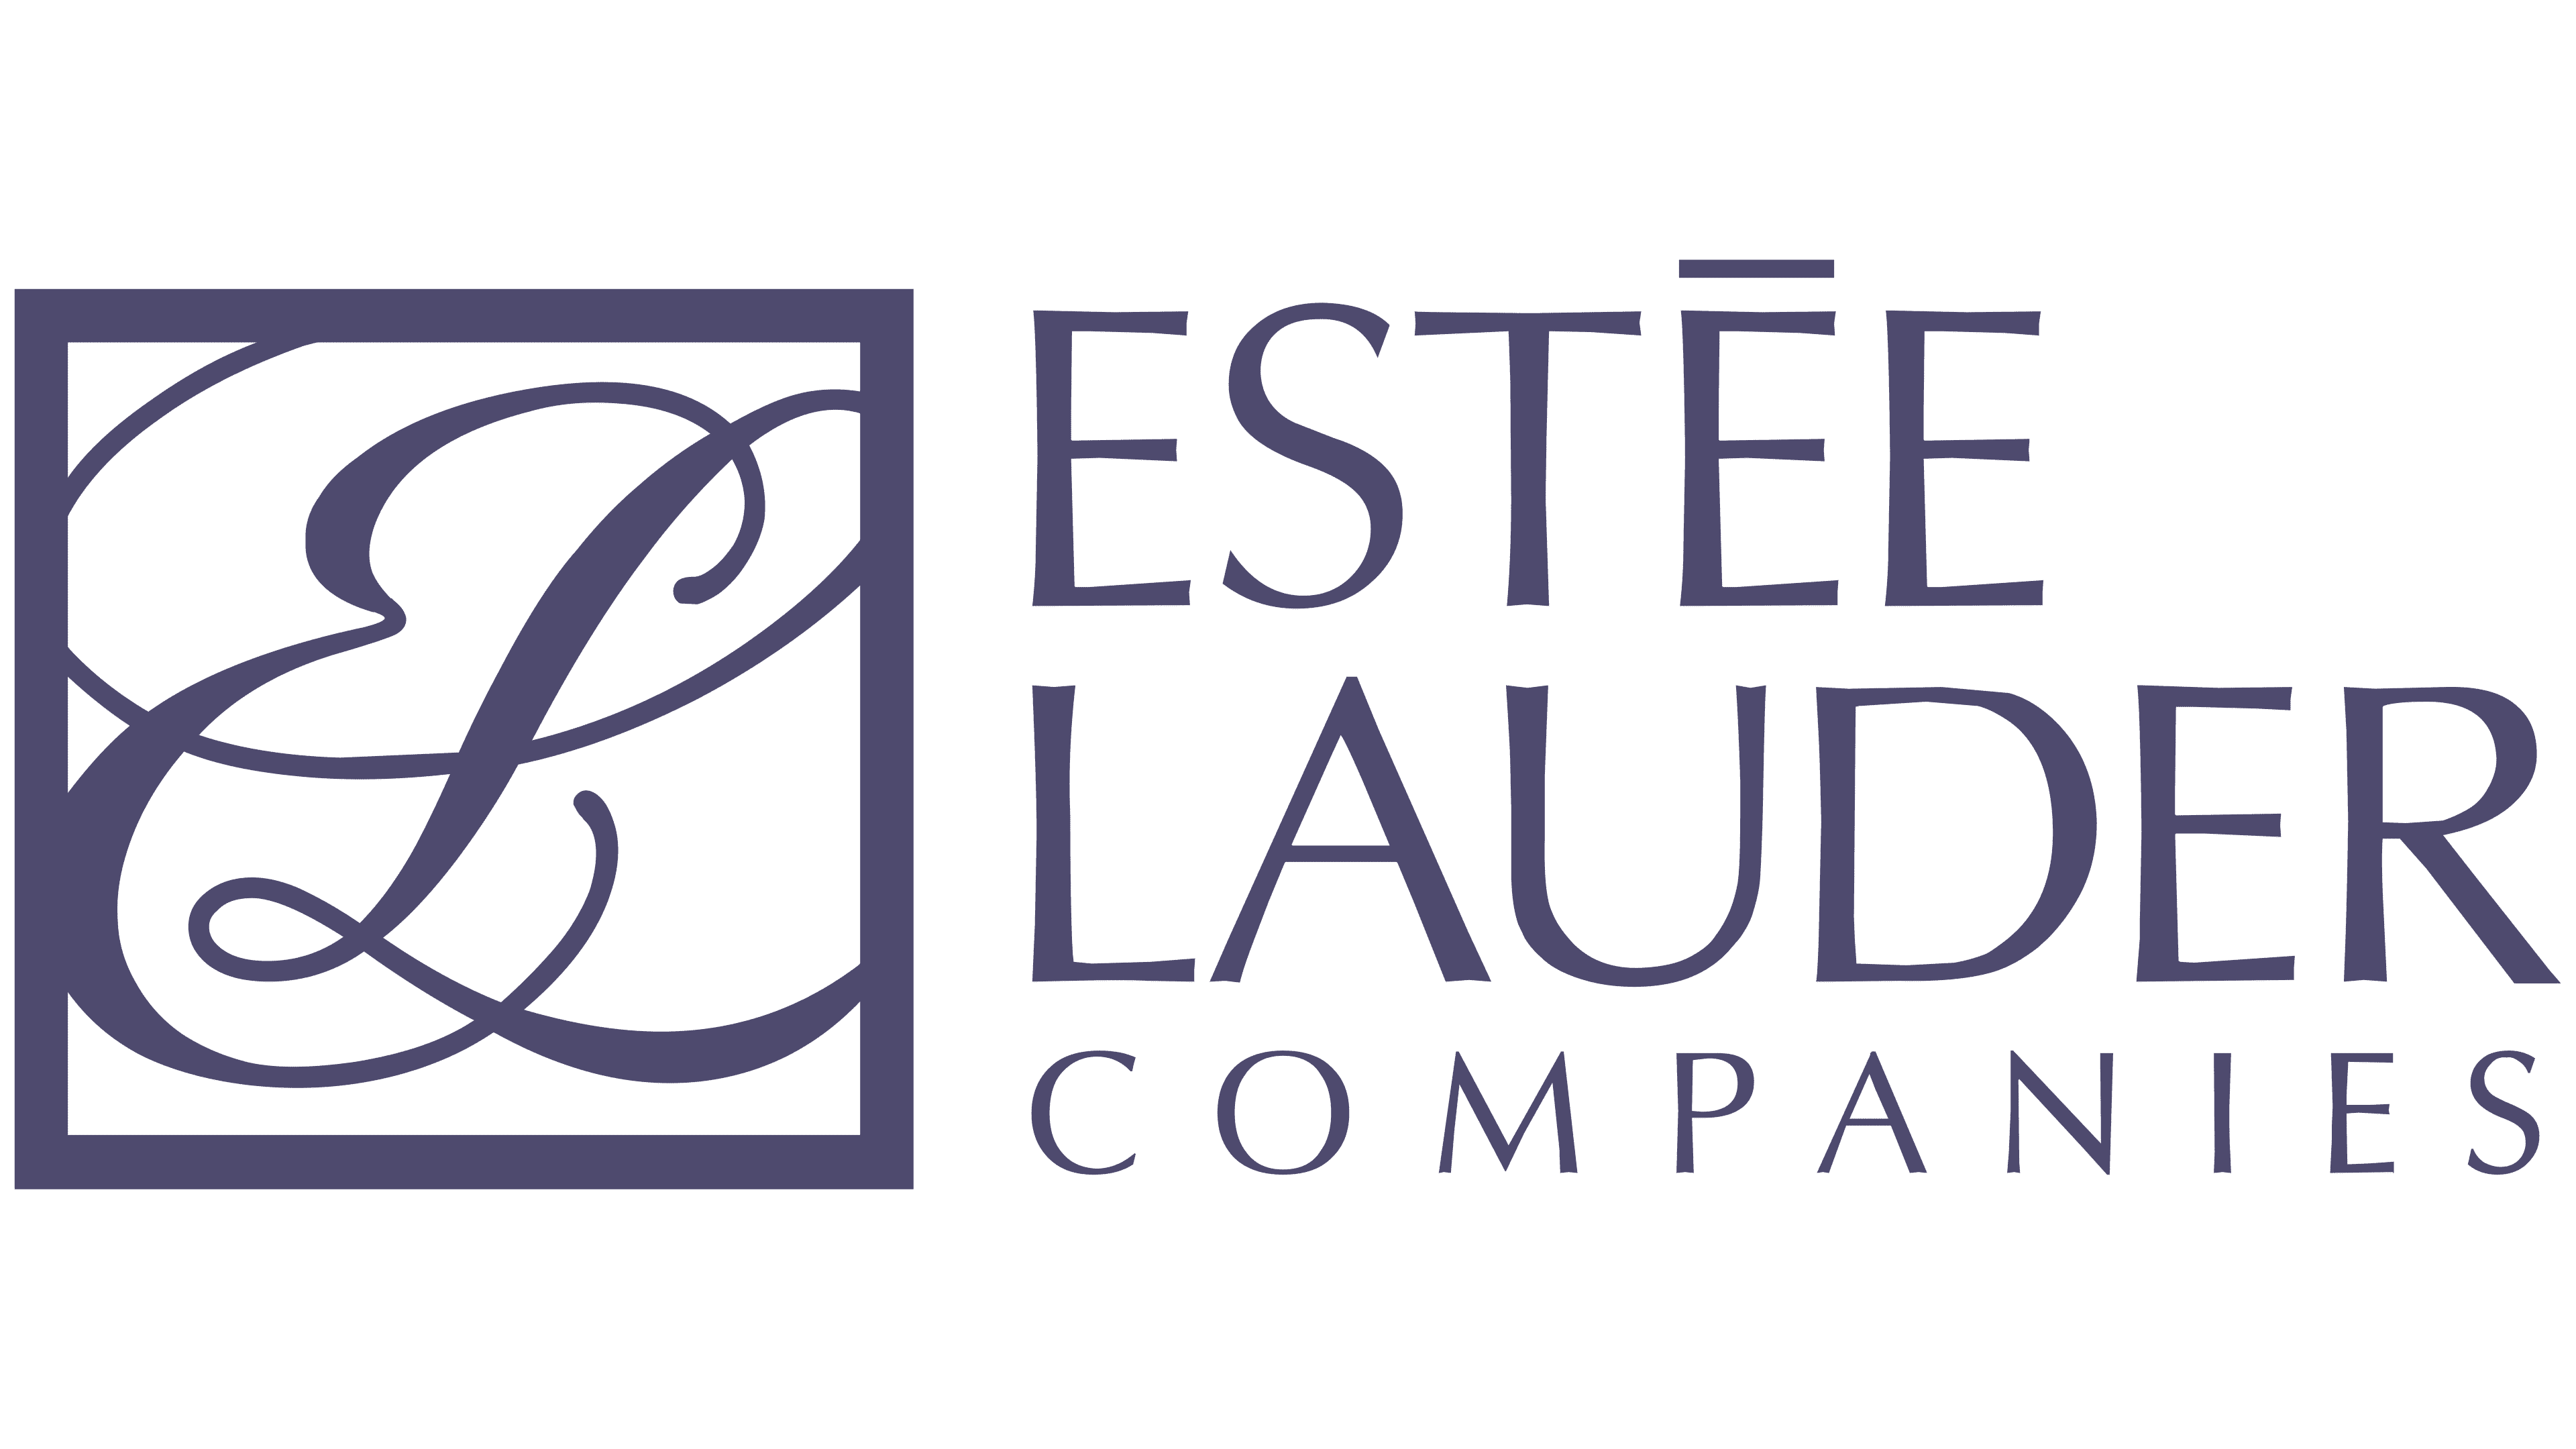 Estee Lauder Logo and symbol, meaning, history, PNG, brand